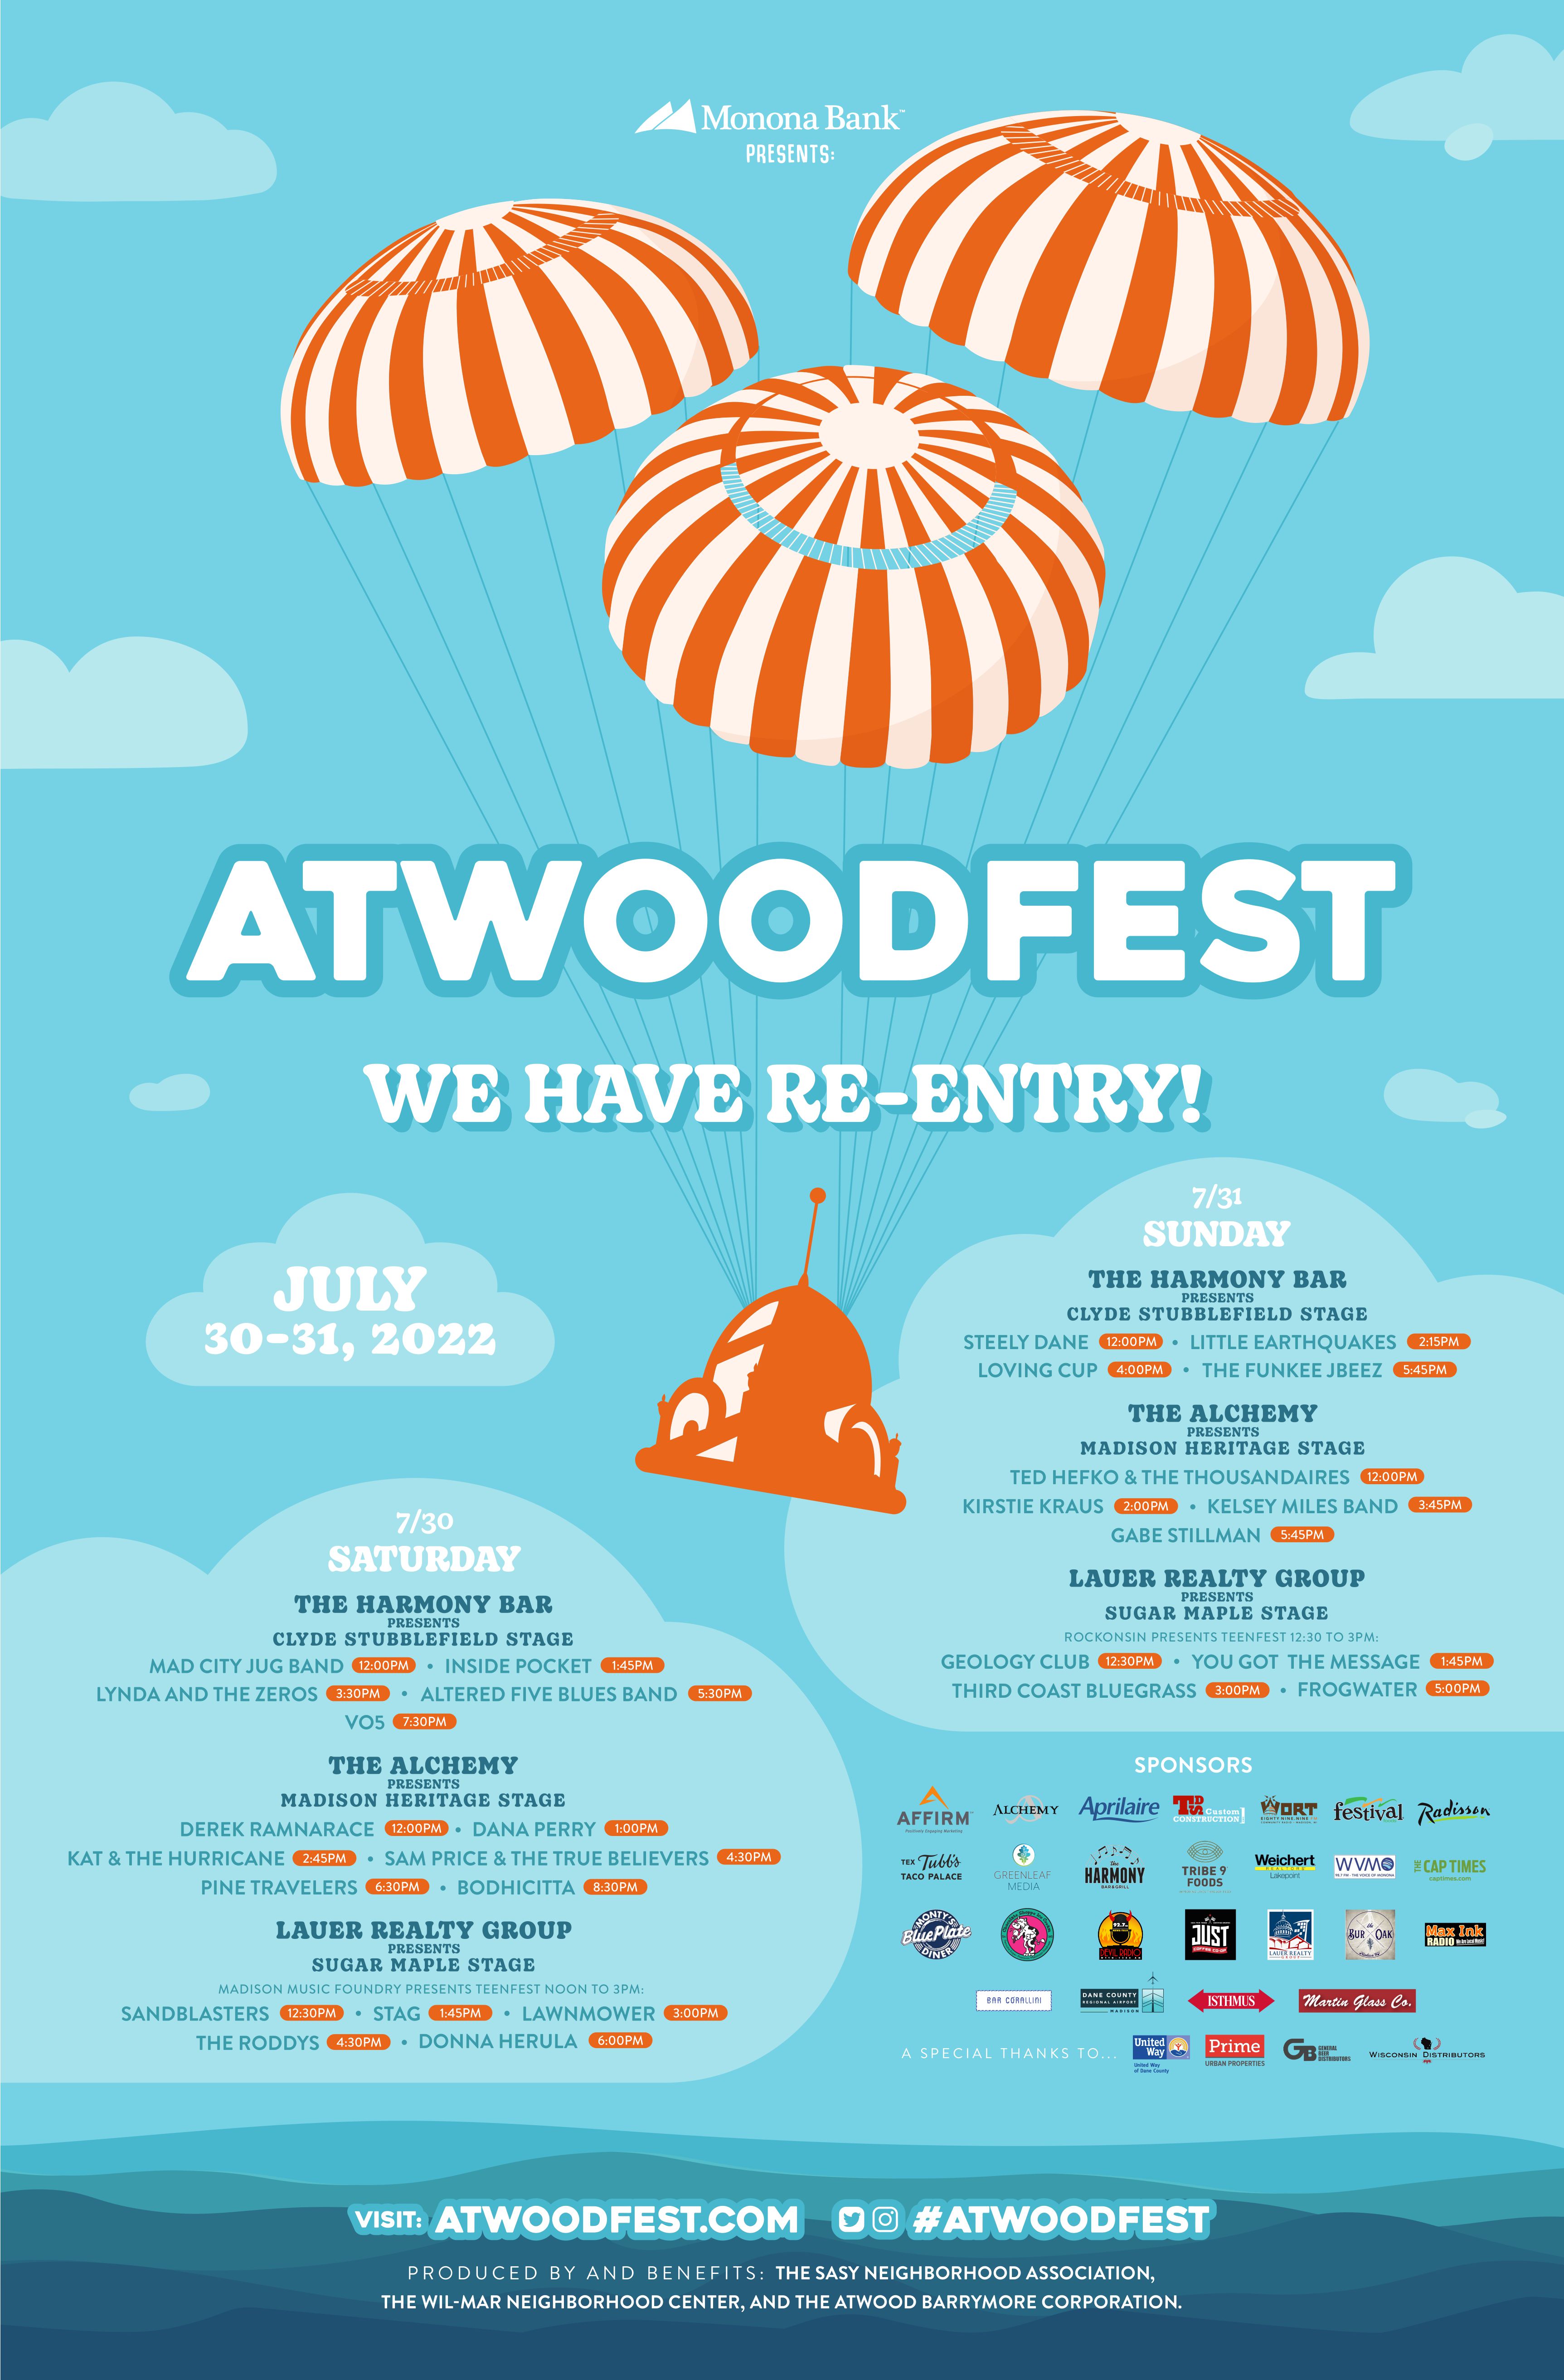 AtwoodFest presented by Monona Bank